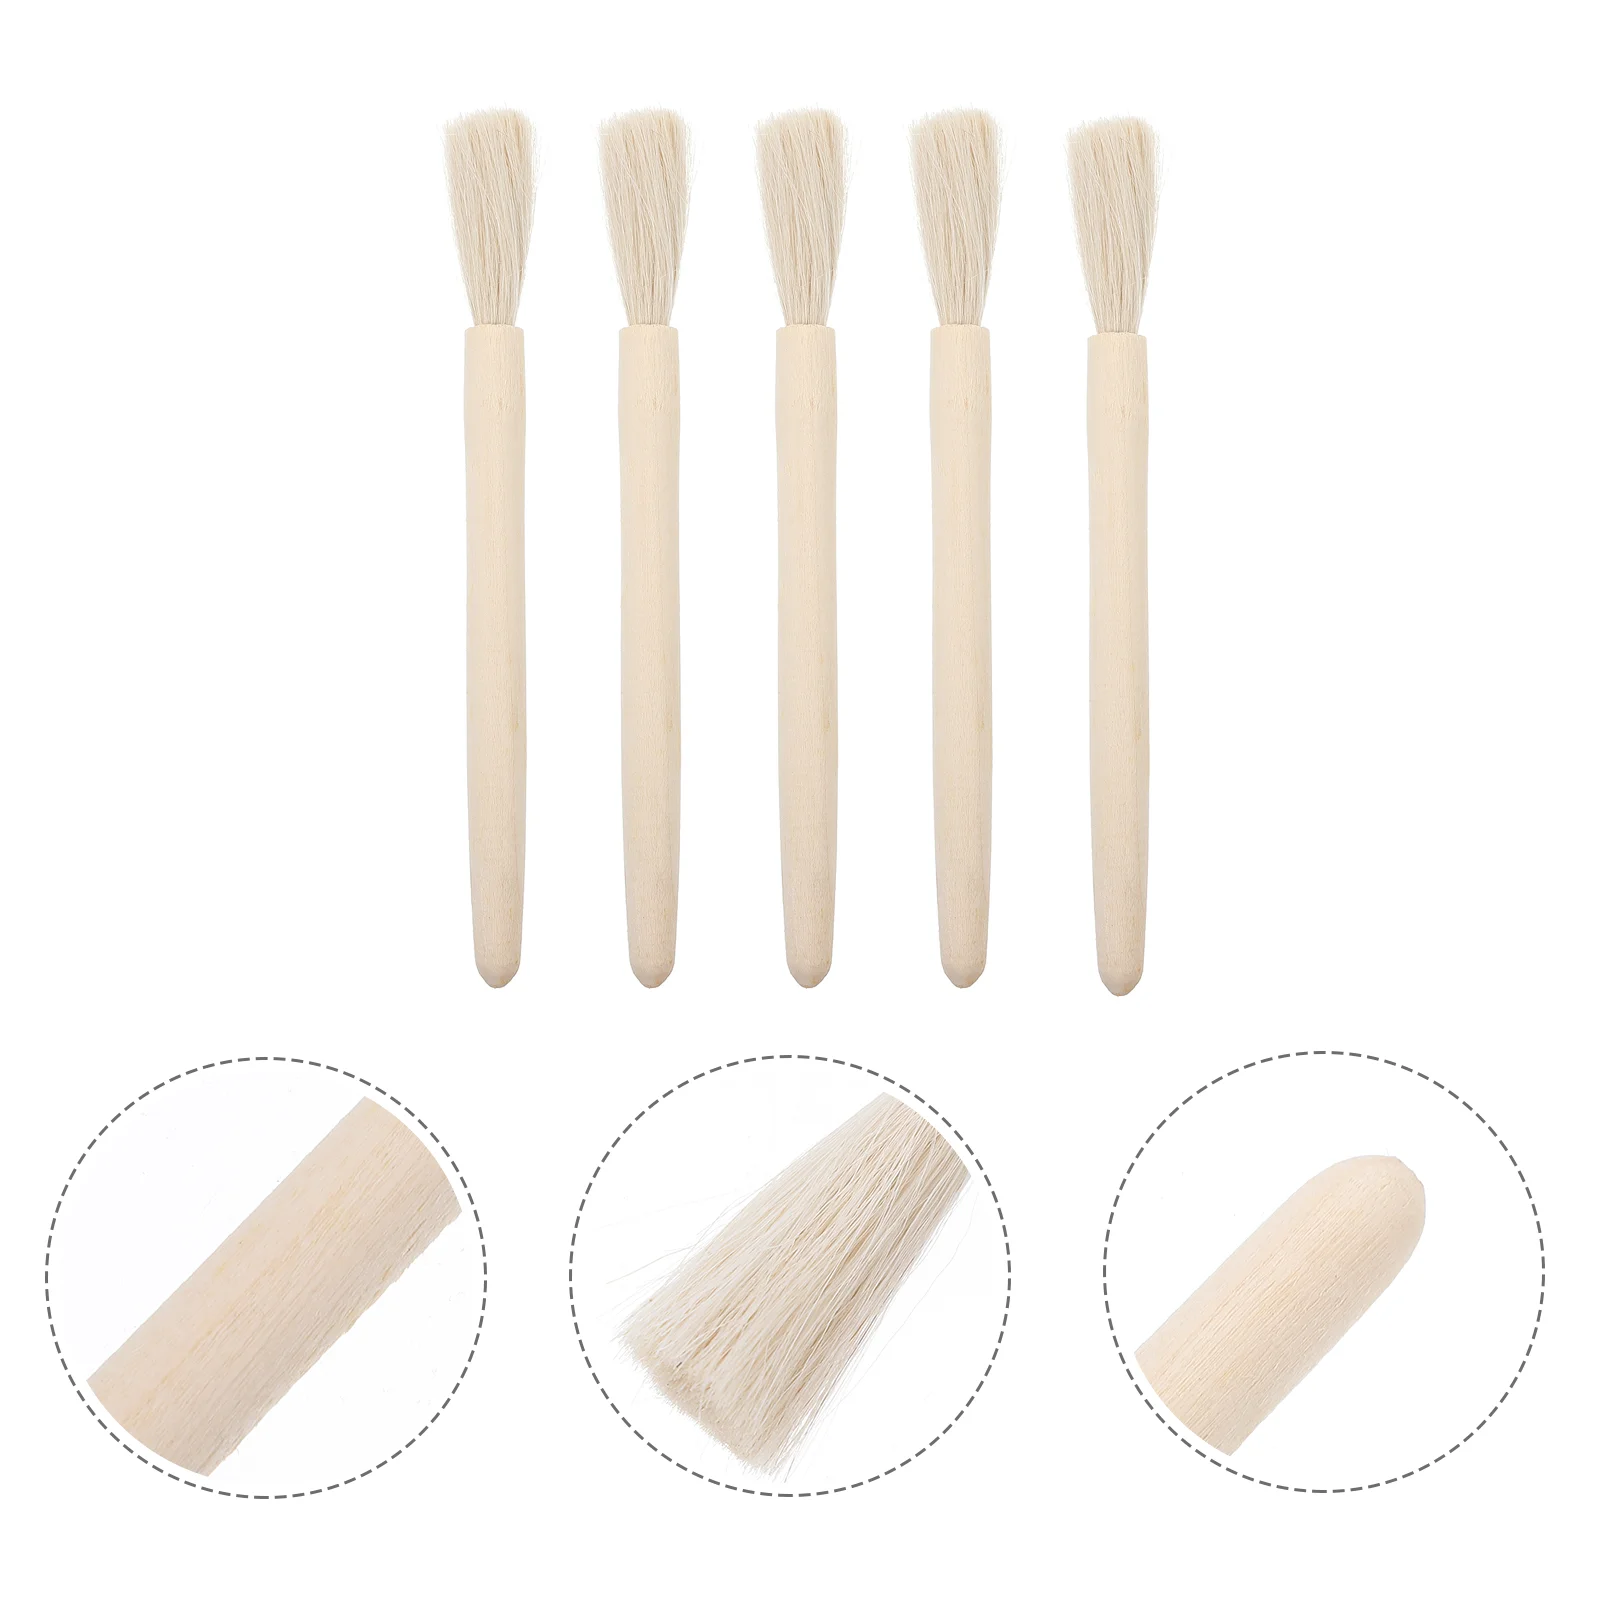 

5 Pcs Laboratory Brush Micro Balance Cleaner Scientific Brushes Durable Wooden Science